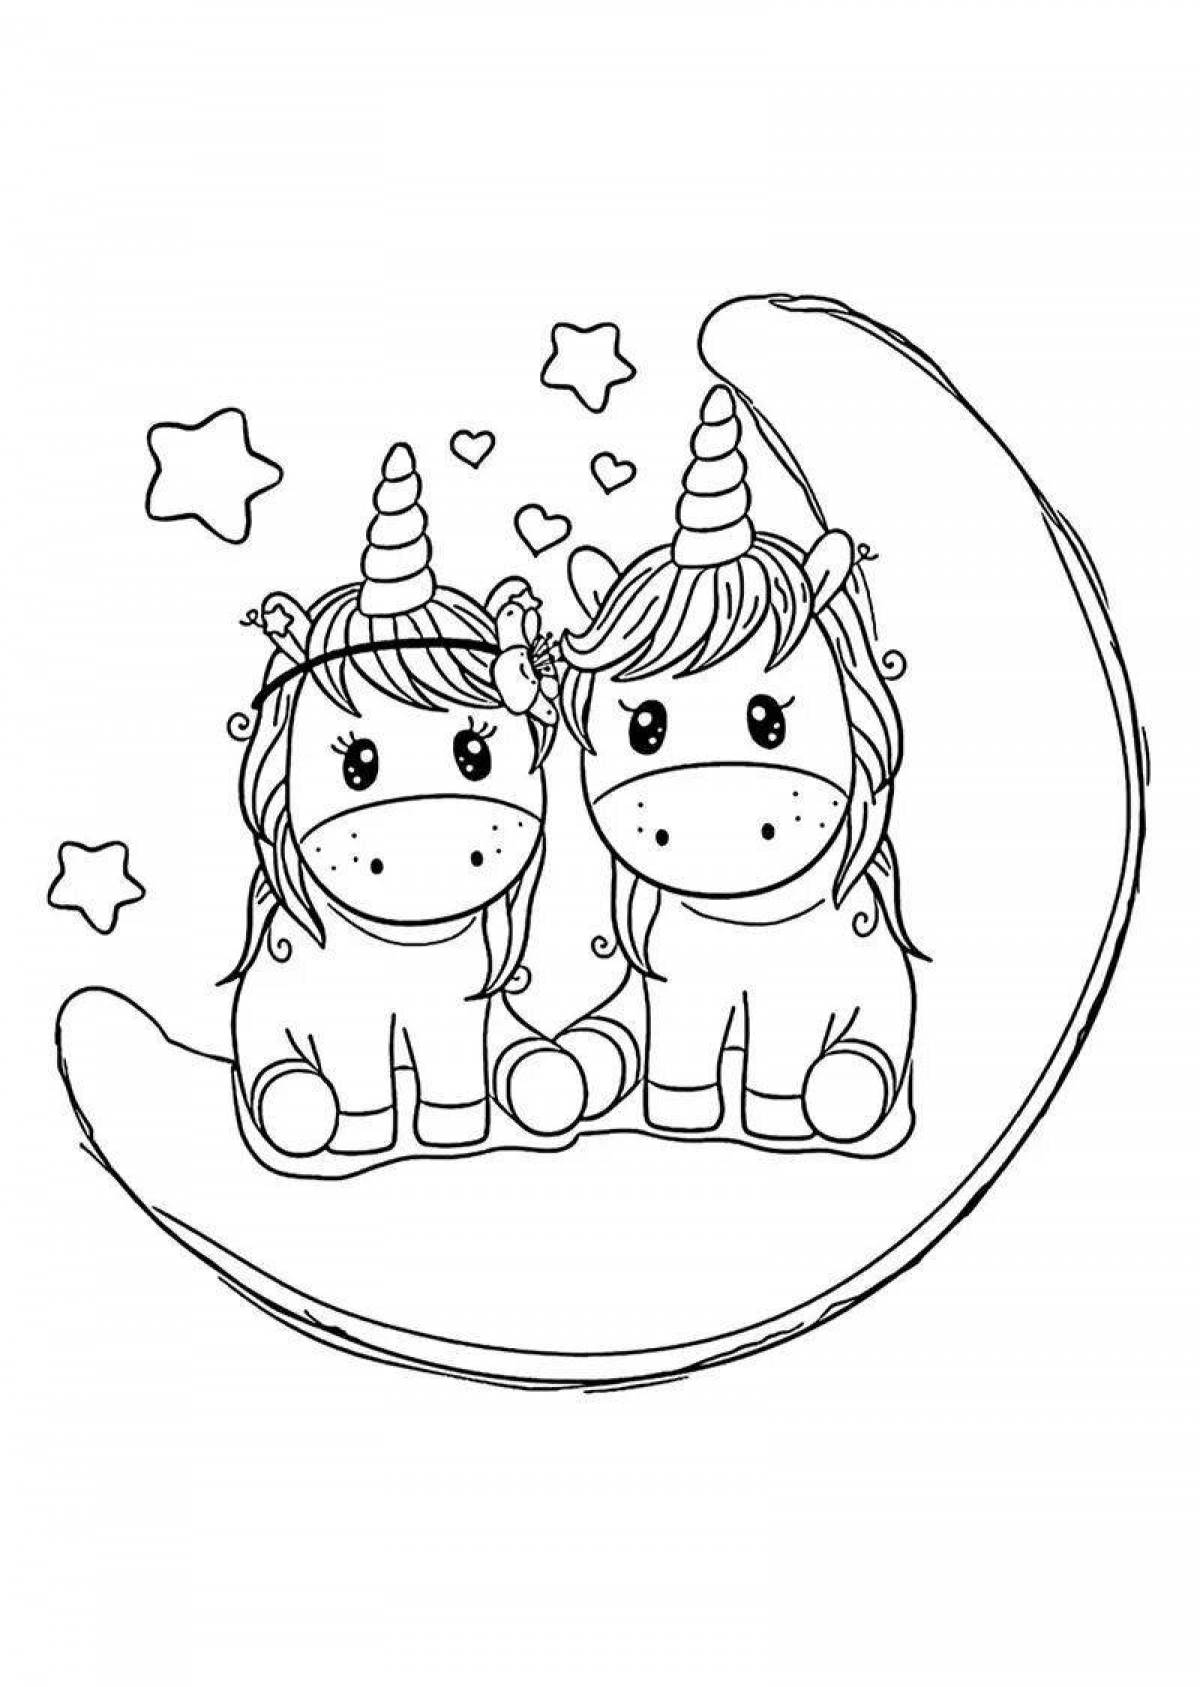 Unicorn cute coloring book for girls